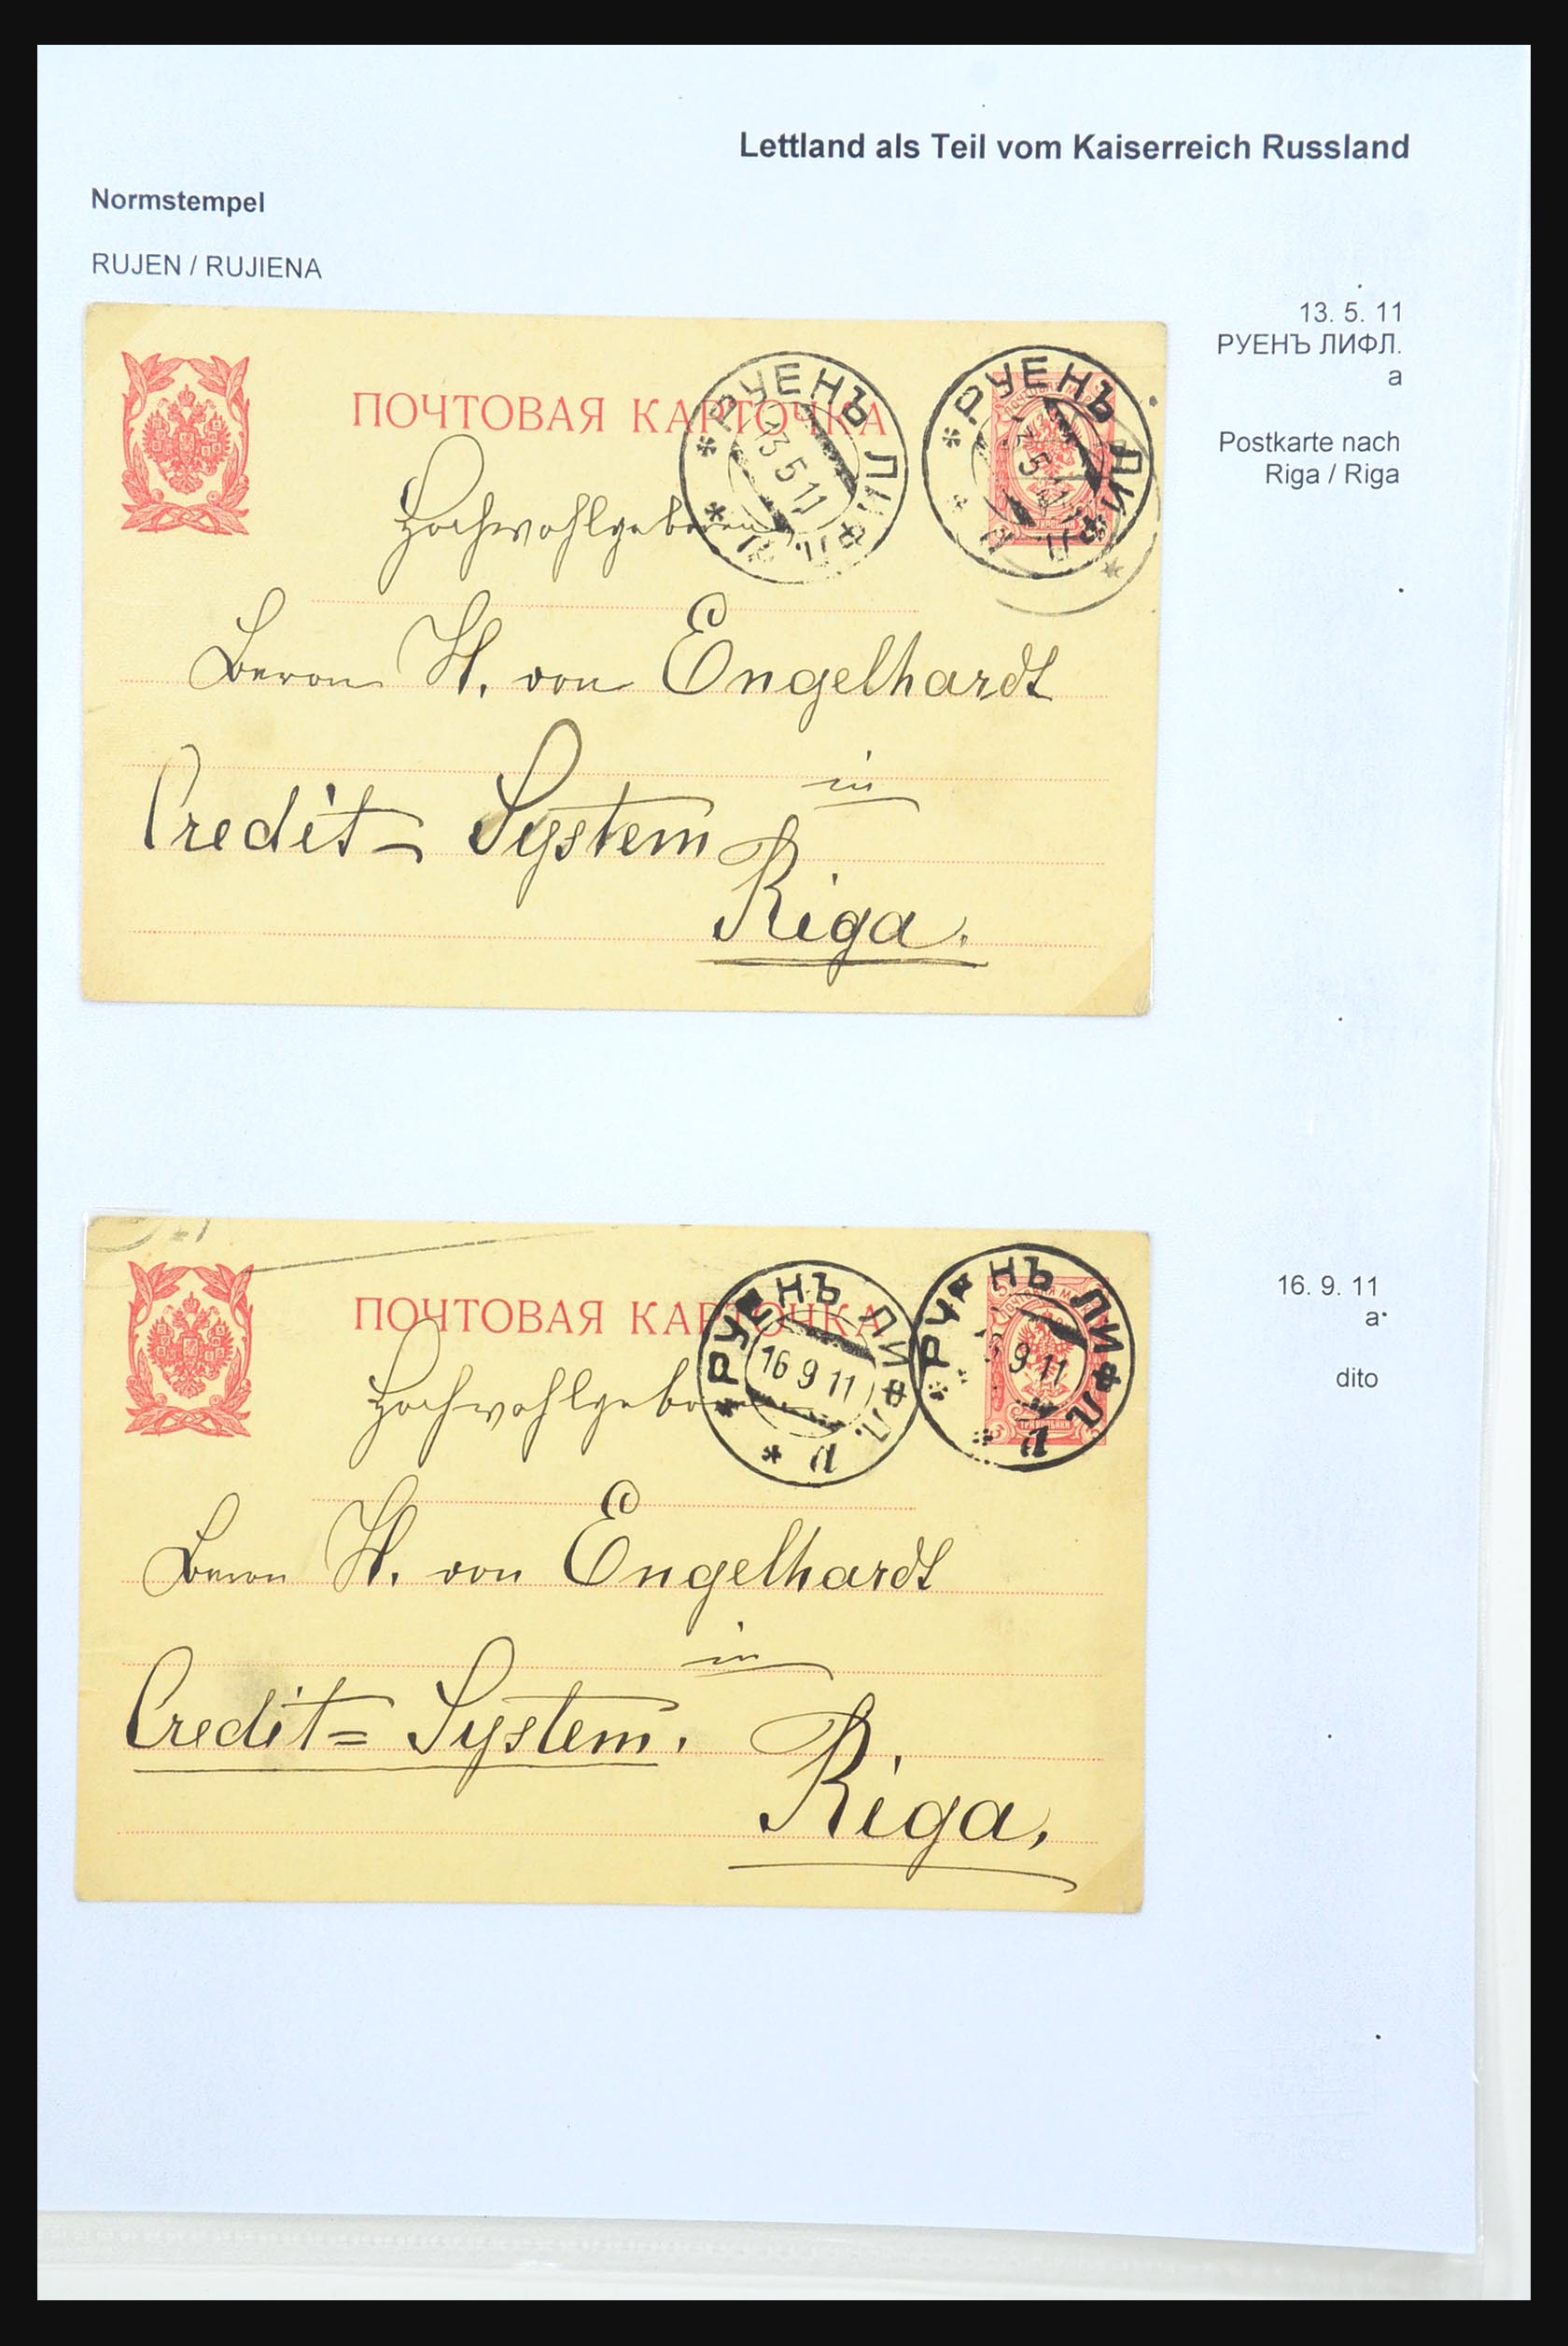 31305 094 - 31305 Latvia as part of Russia 1817-1918.